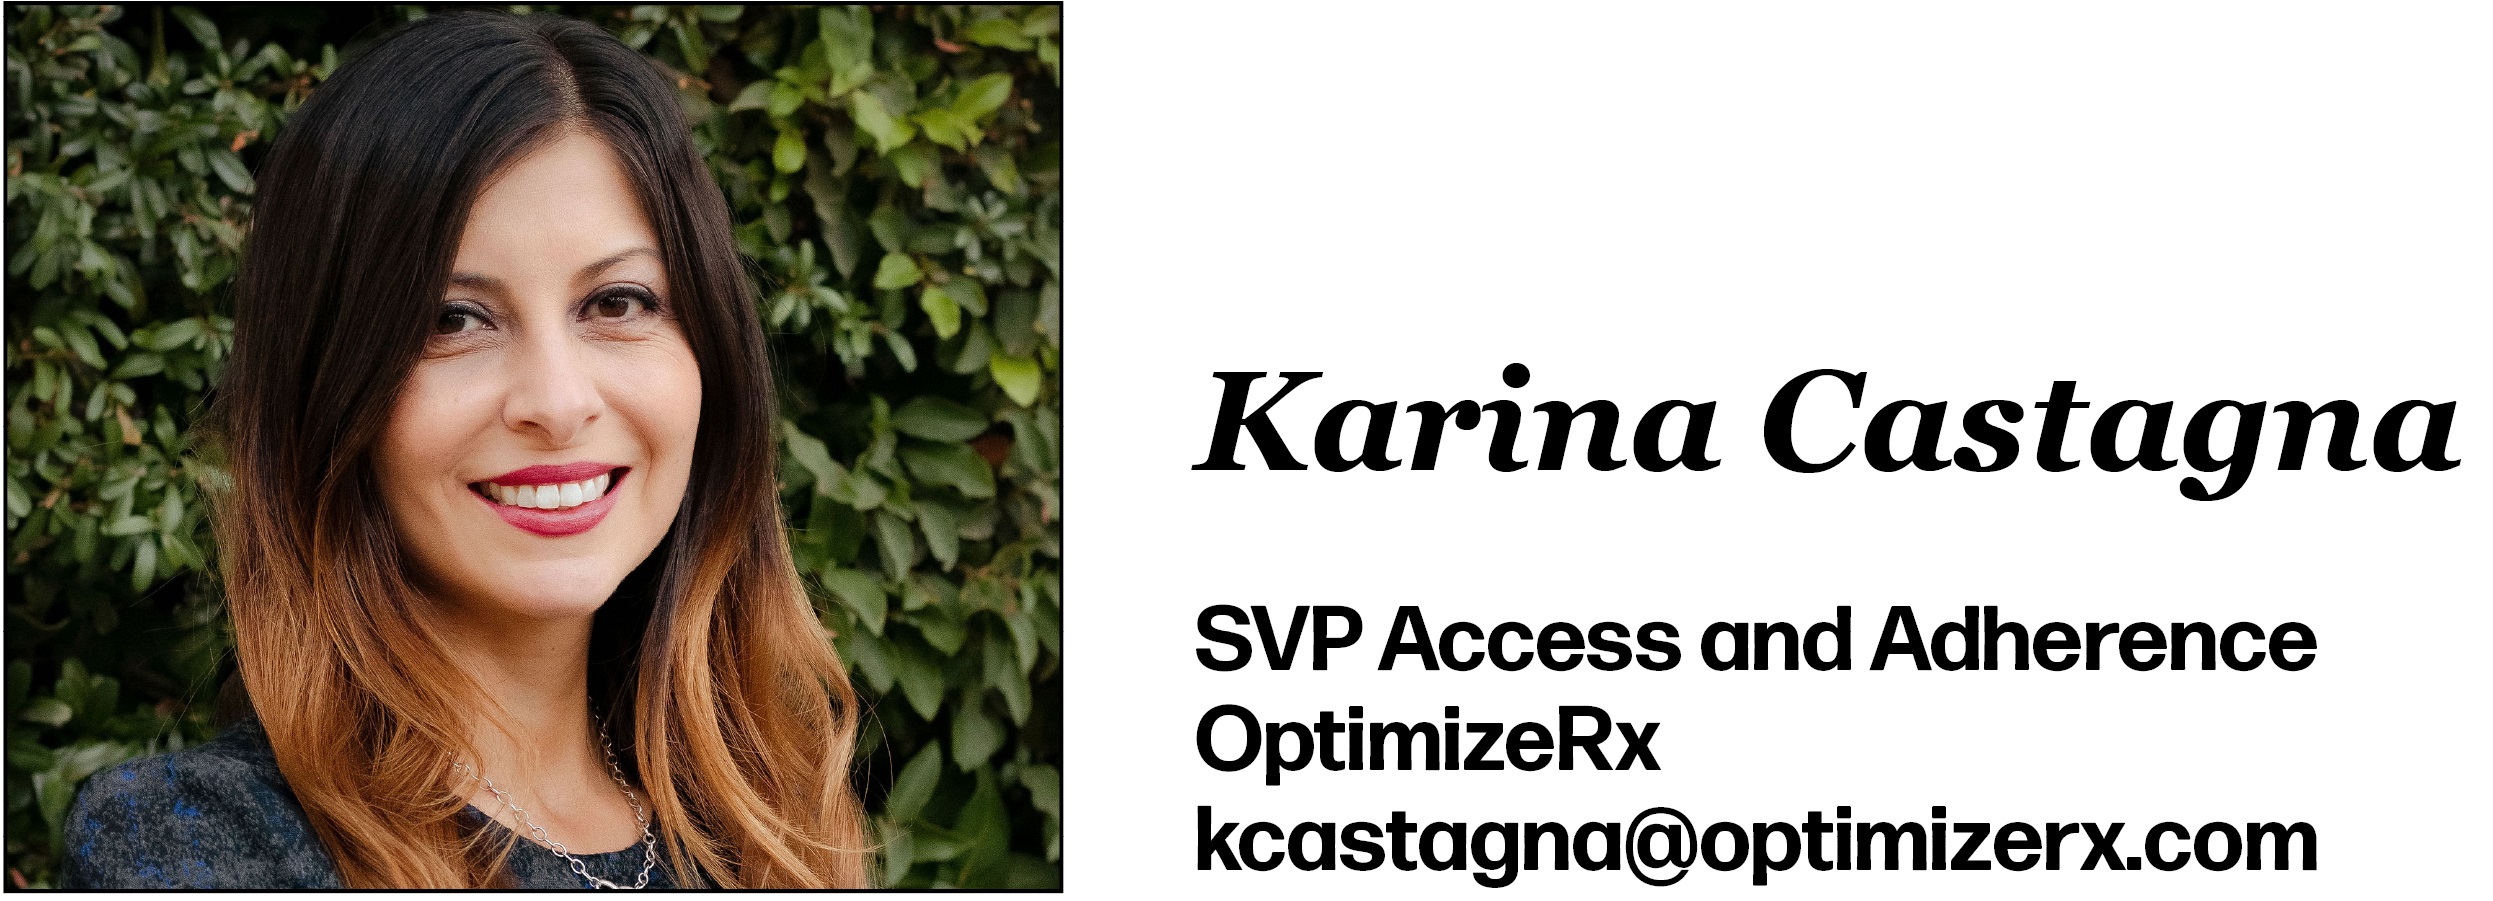 Karina Castagna is SVP Access and Adherence at OptimizeRx. Her email is kcastagna@optimizerx.com. 